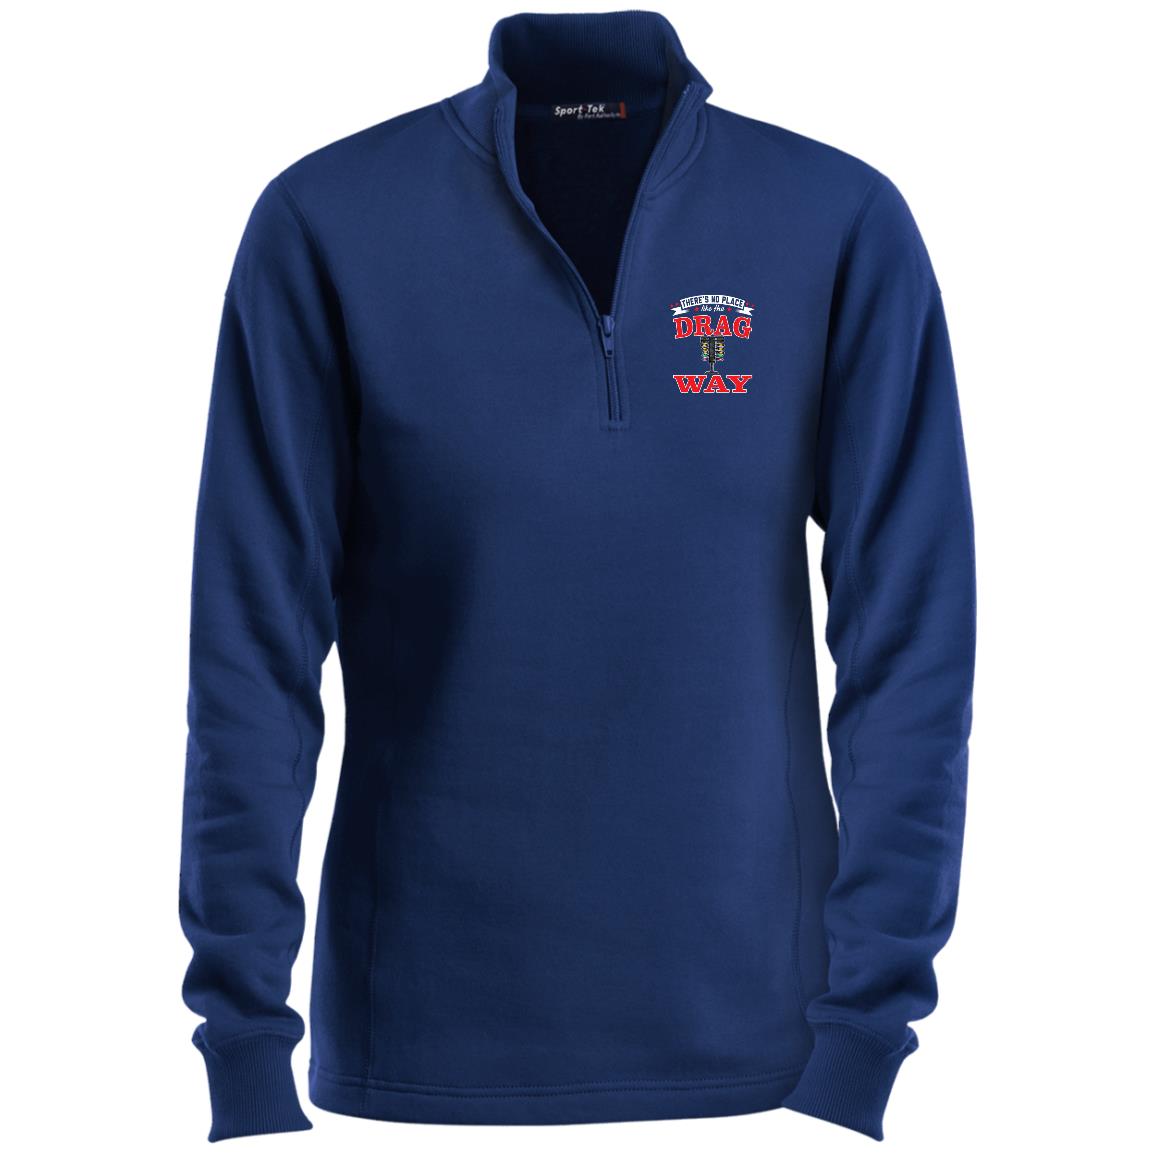 There's No Place Like The Dragway Ladies 1/4 Zip Sweatshirt